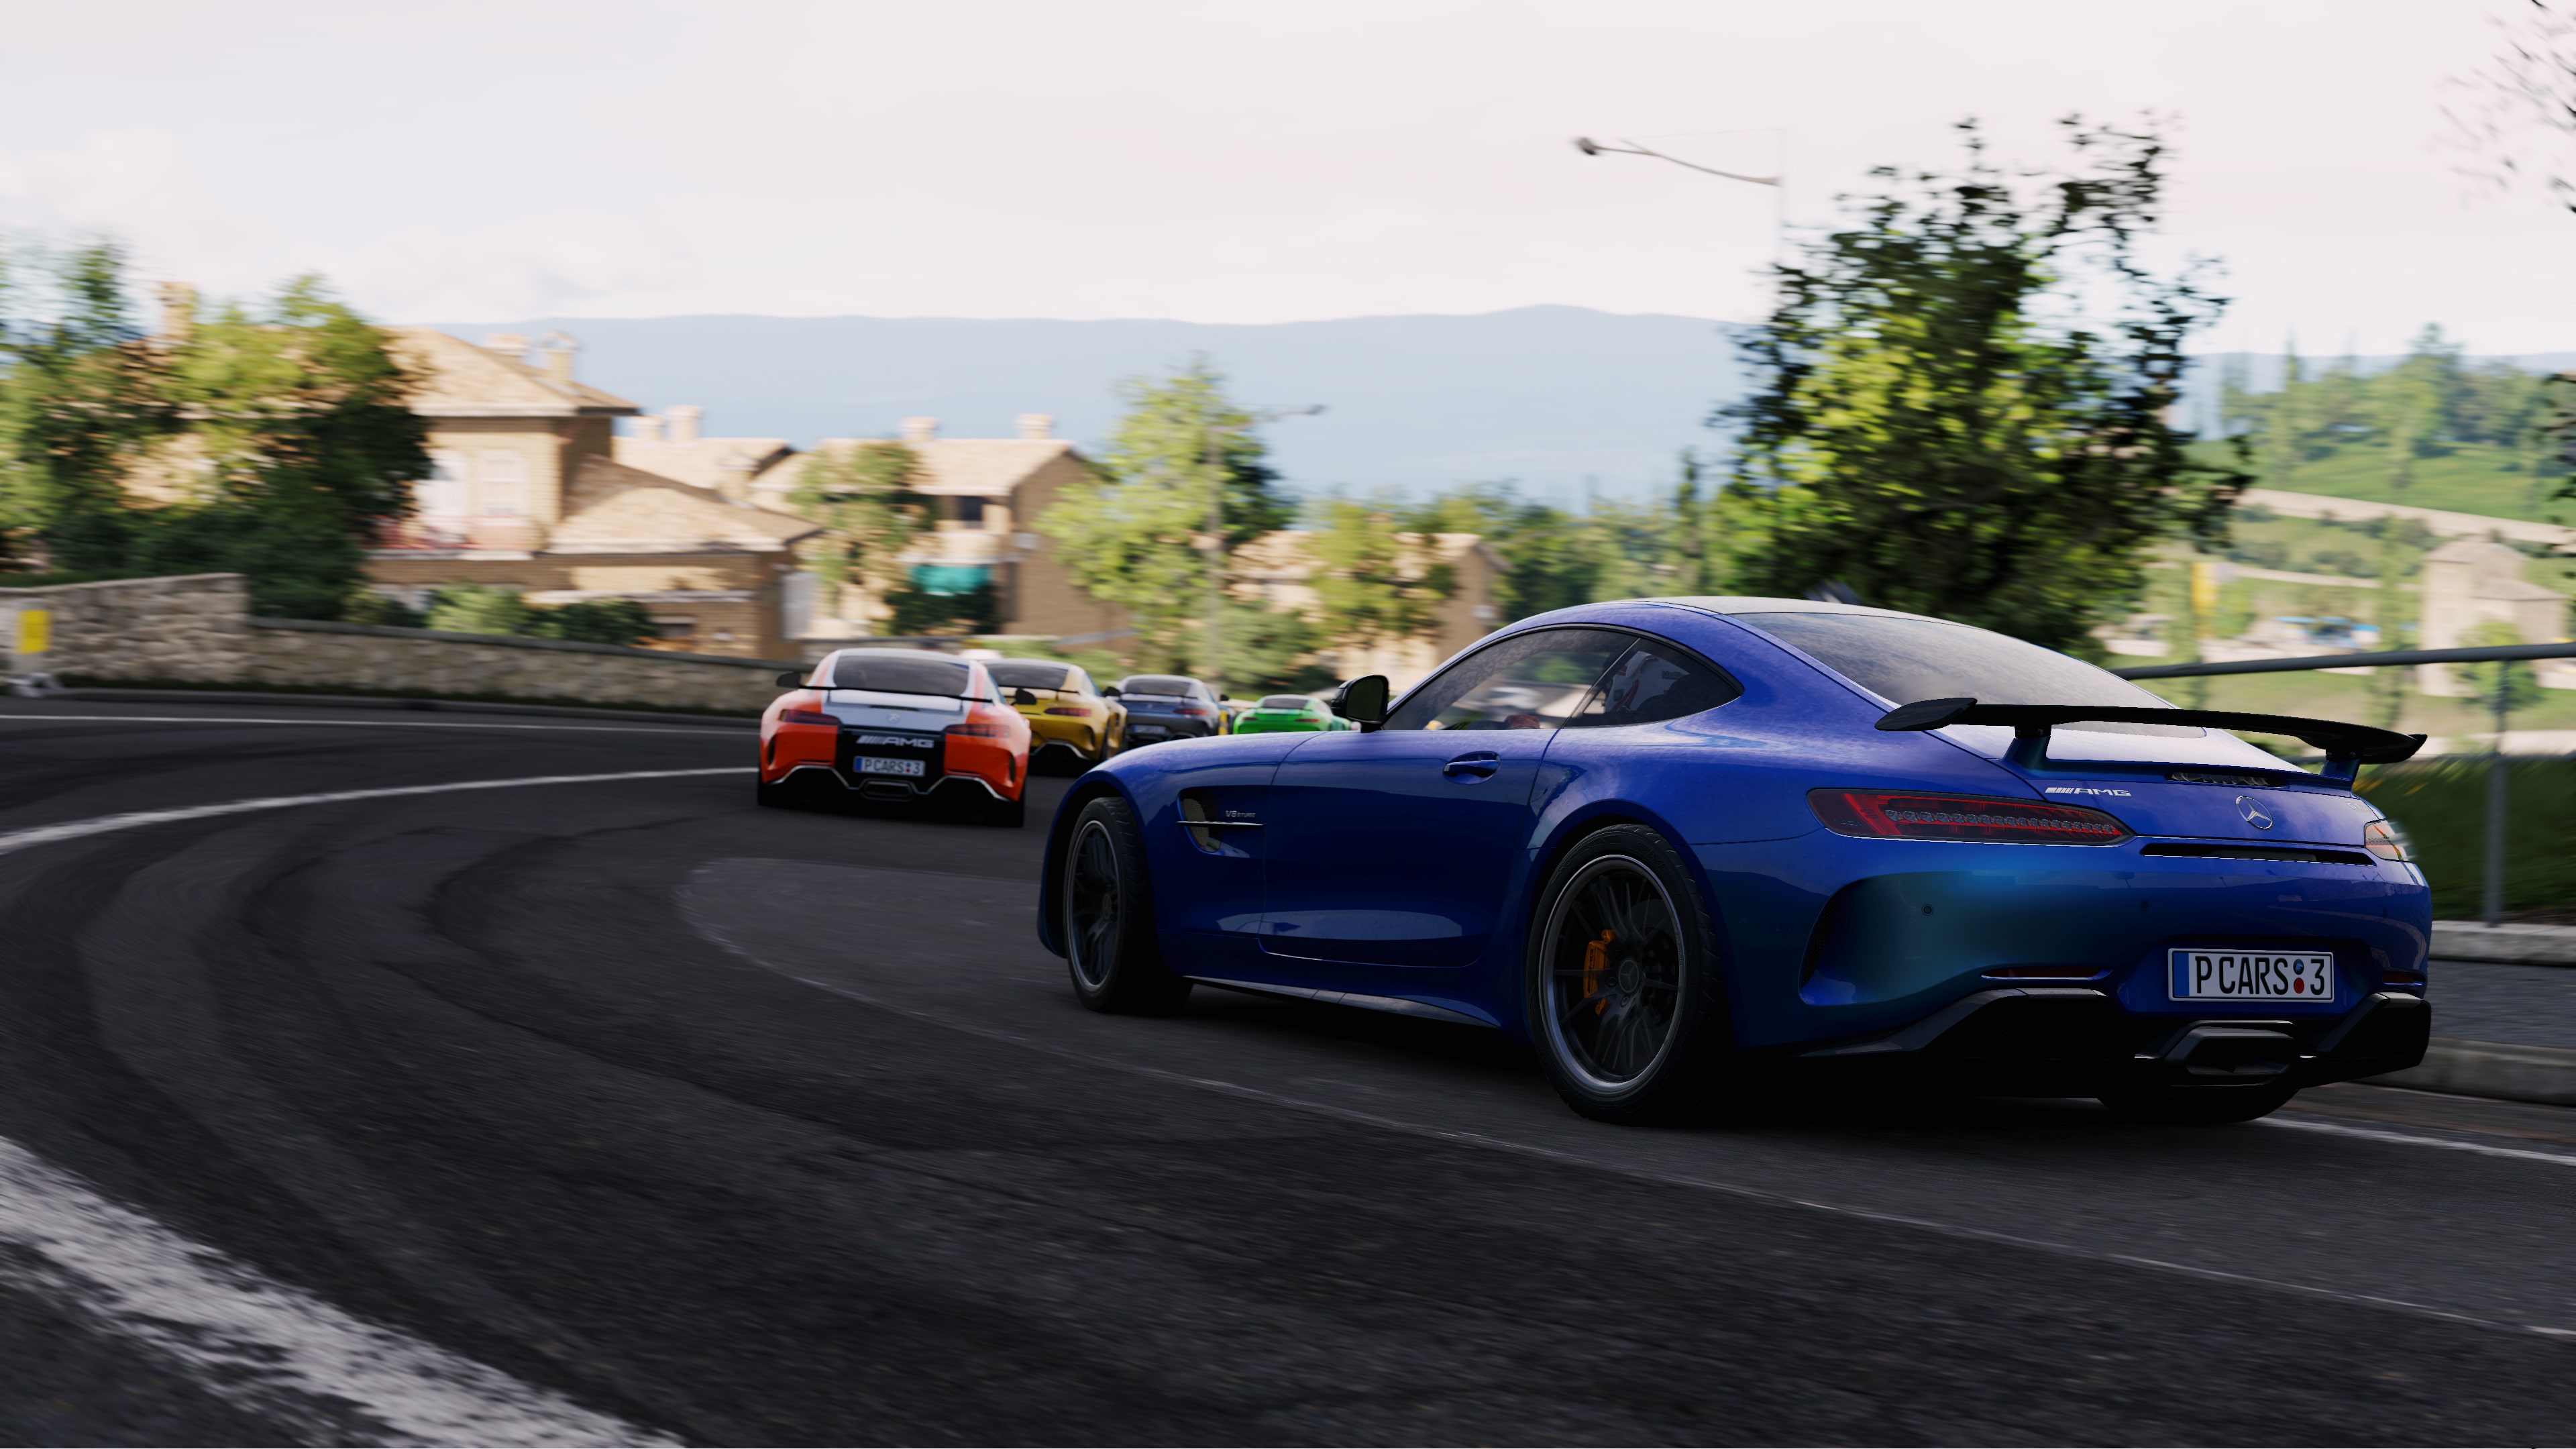 Playstation PS4 Project Cars 3 Multicolor